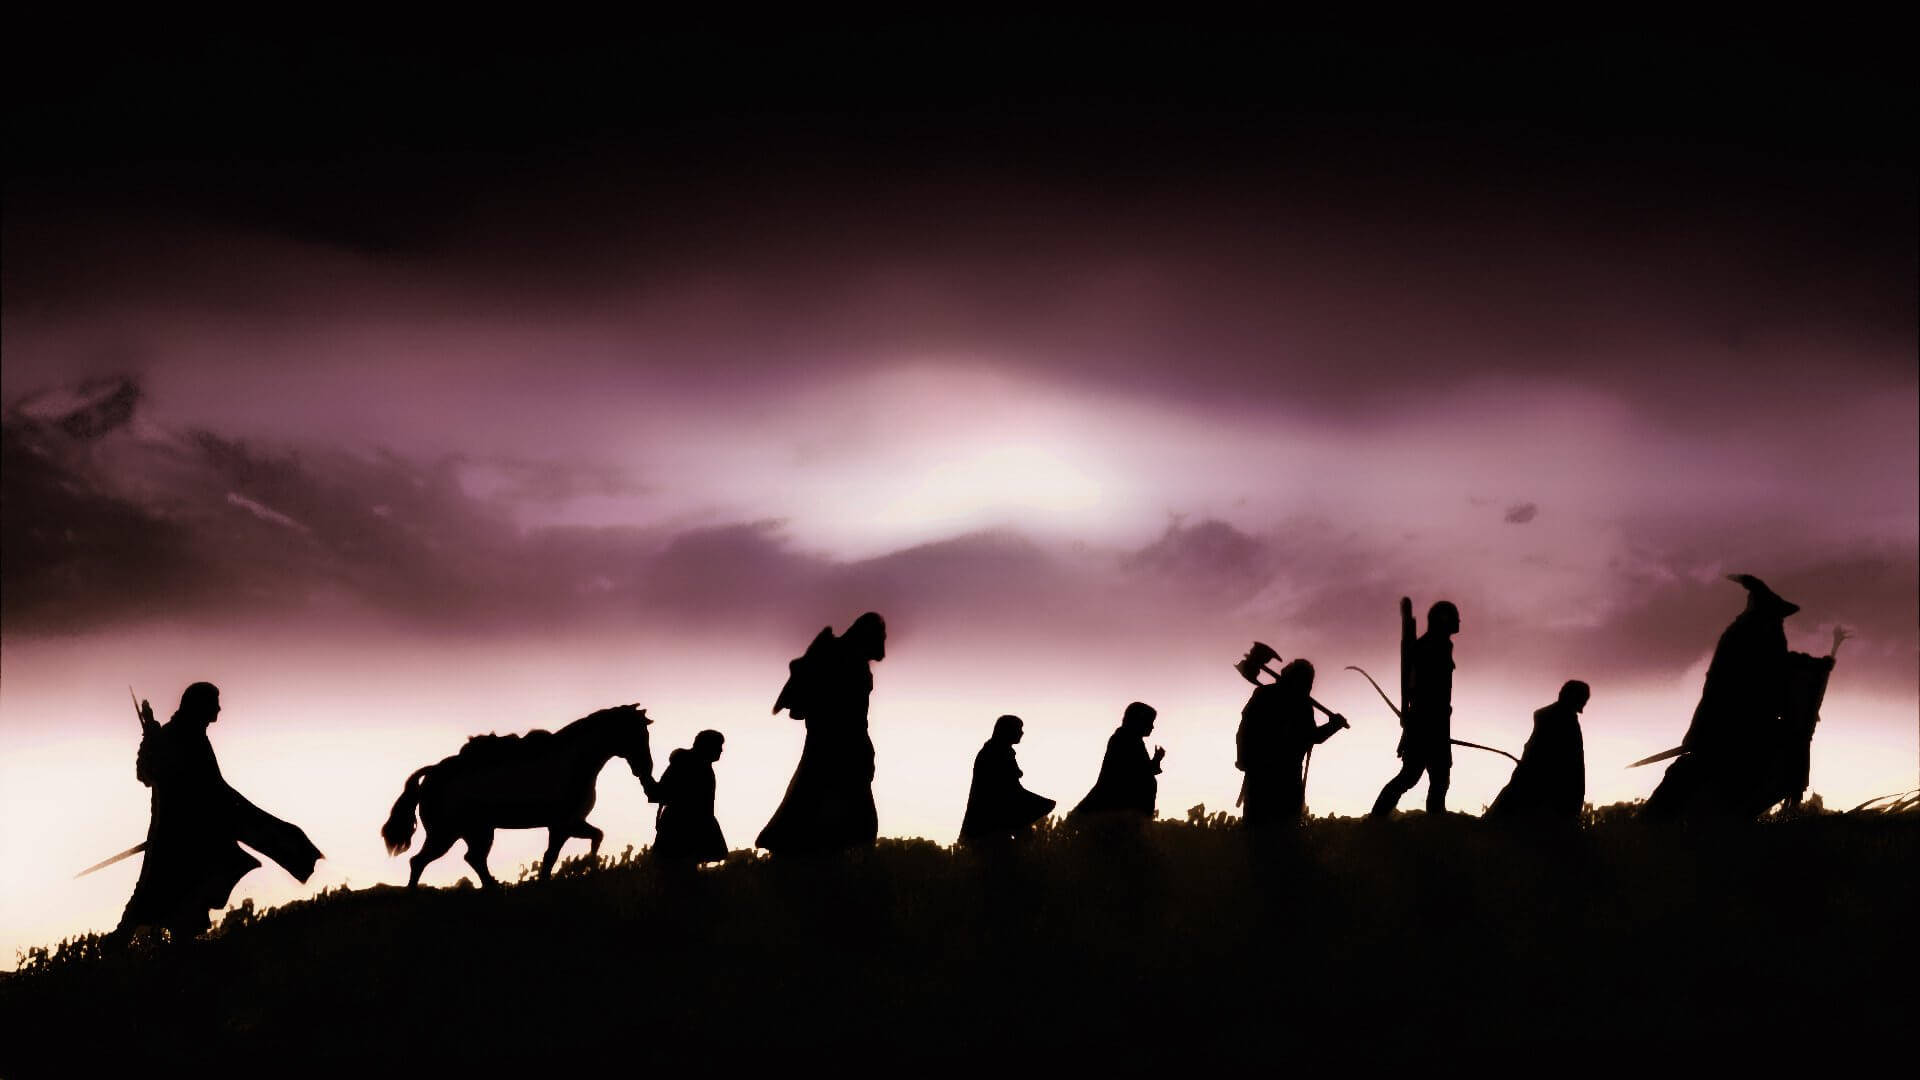 Silhouettes Of People On A Hill With A Dark Sky Background